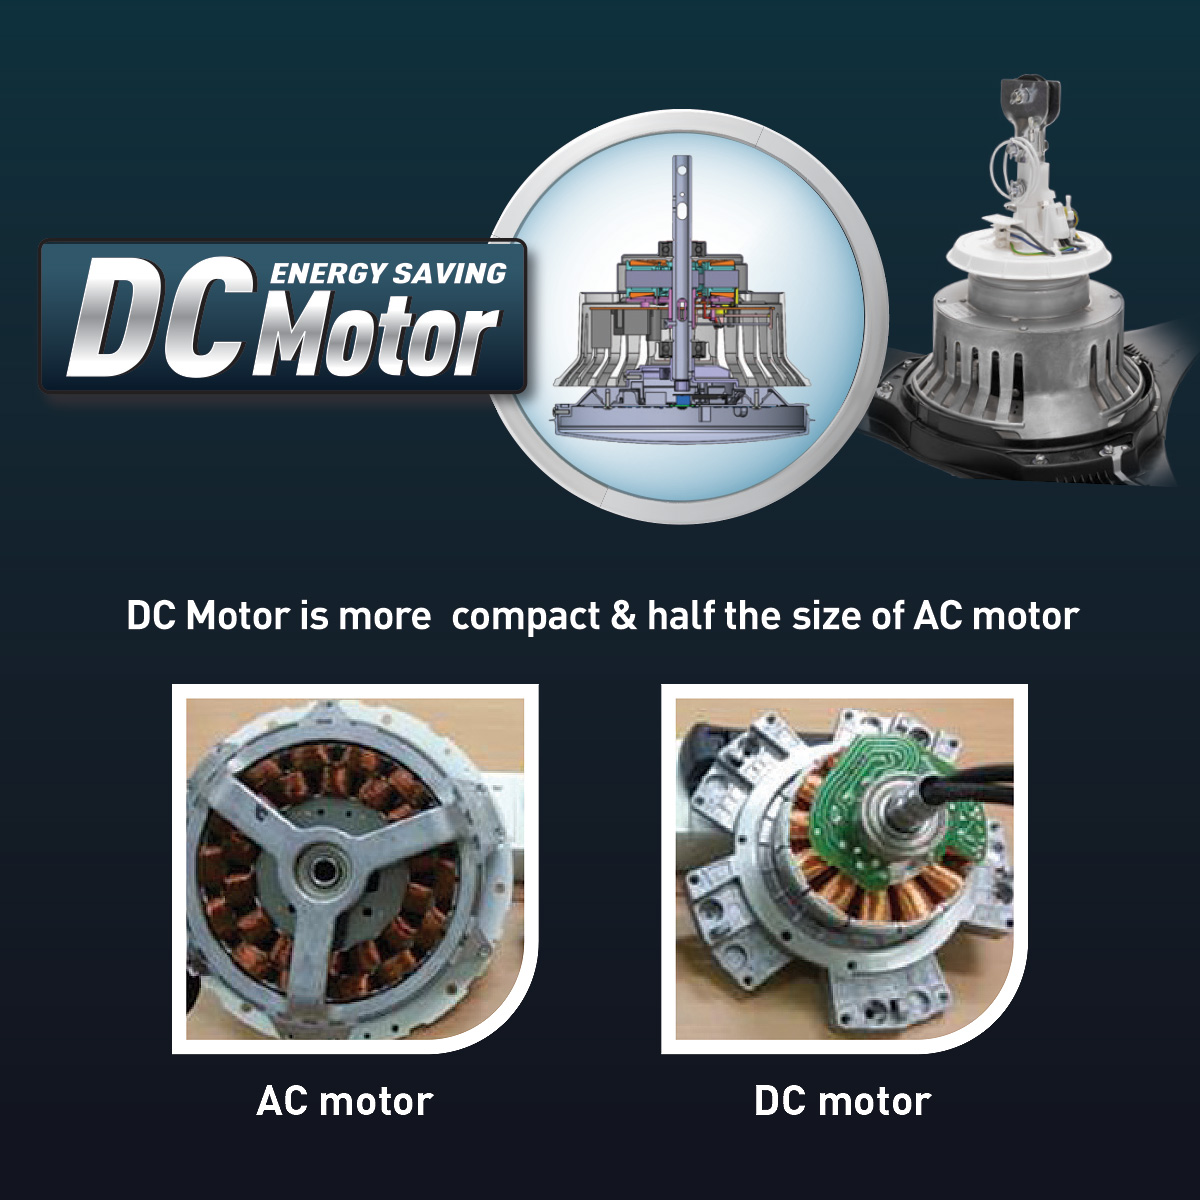 More Compact DC Motor Unit Built-in PCB to create a mono form outlook Higher Motor Power Output For higher air volume and wider air flow Advantages of a DC motor: 1. Uses less energy – compared AC motor 2. Quiet operation 3. More compact and lighter motor